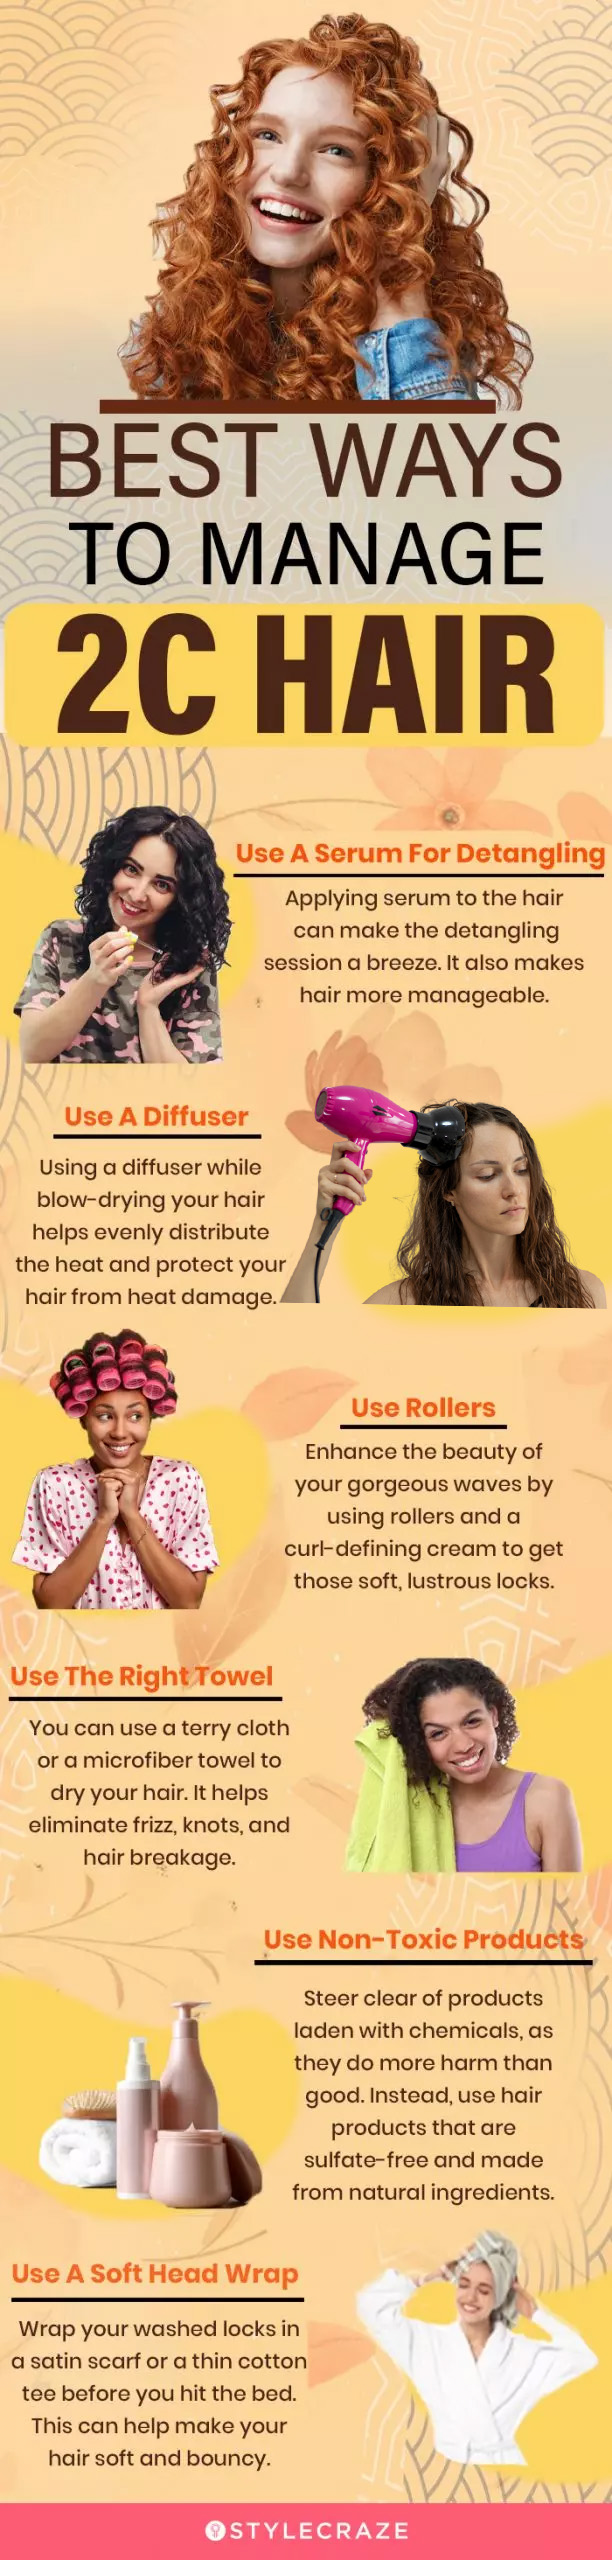 best ways to manage 2c hair (infographic)